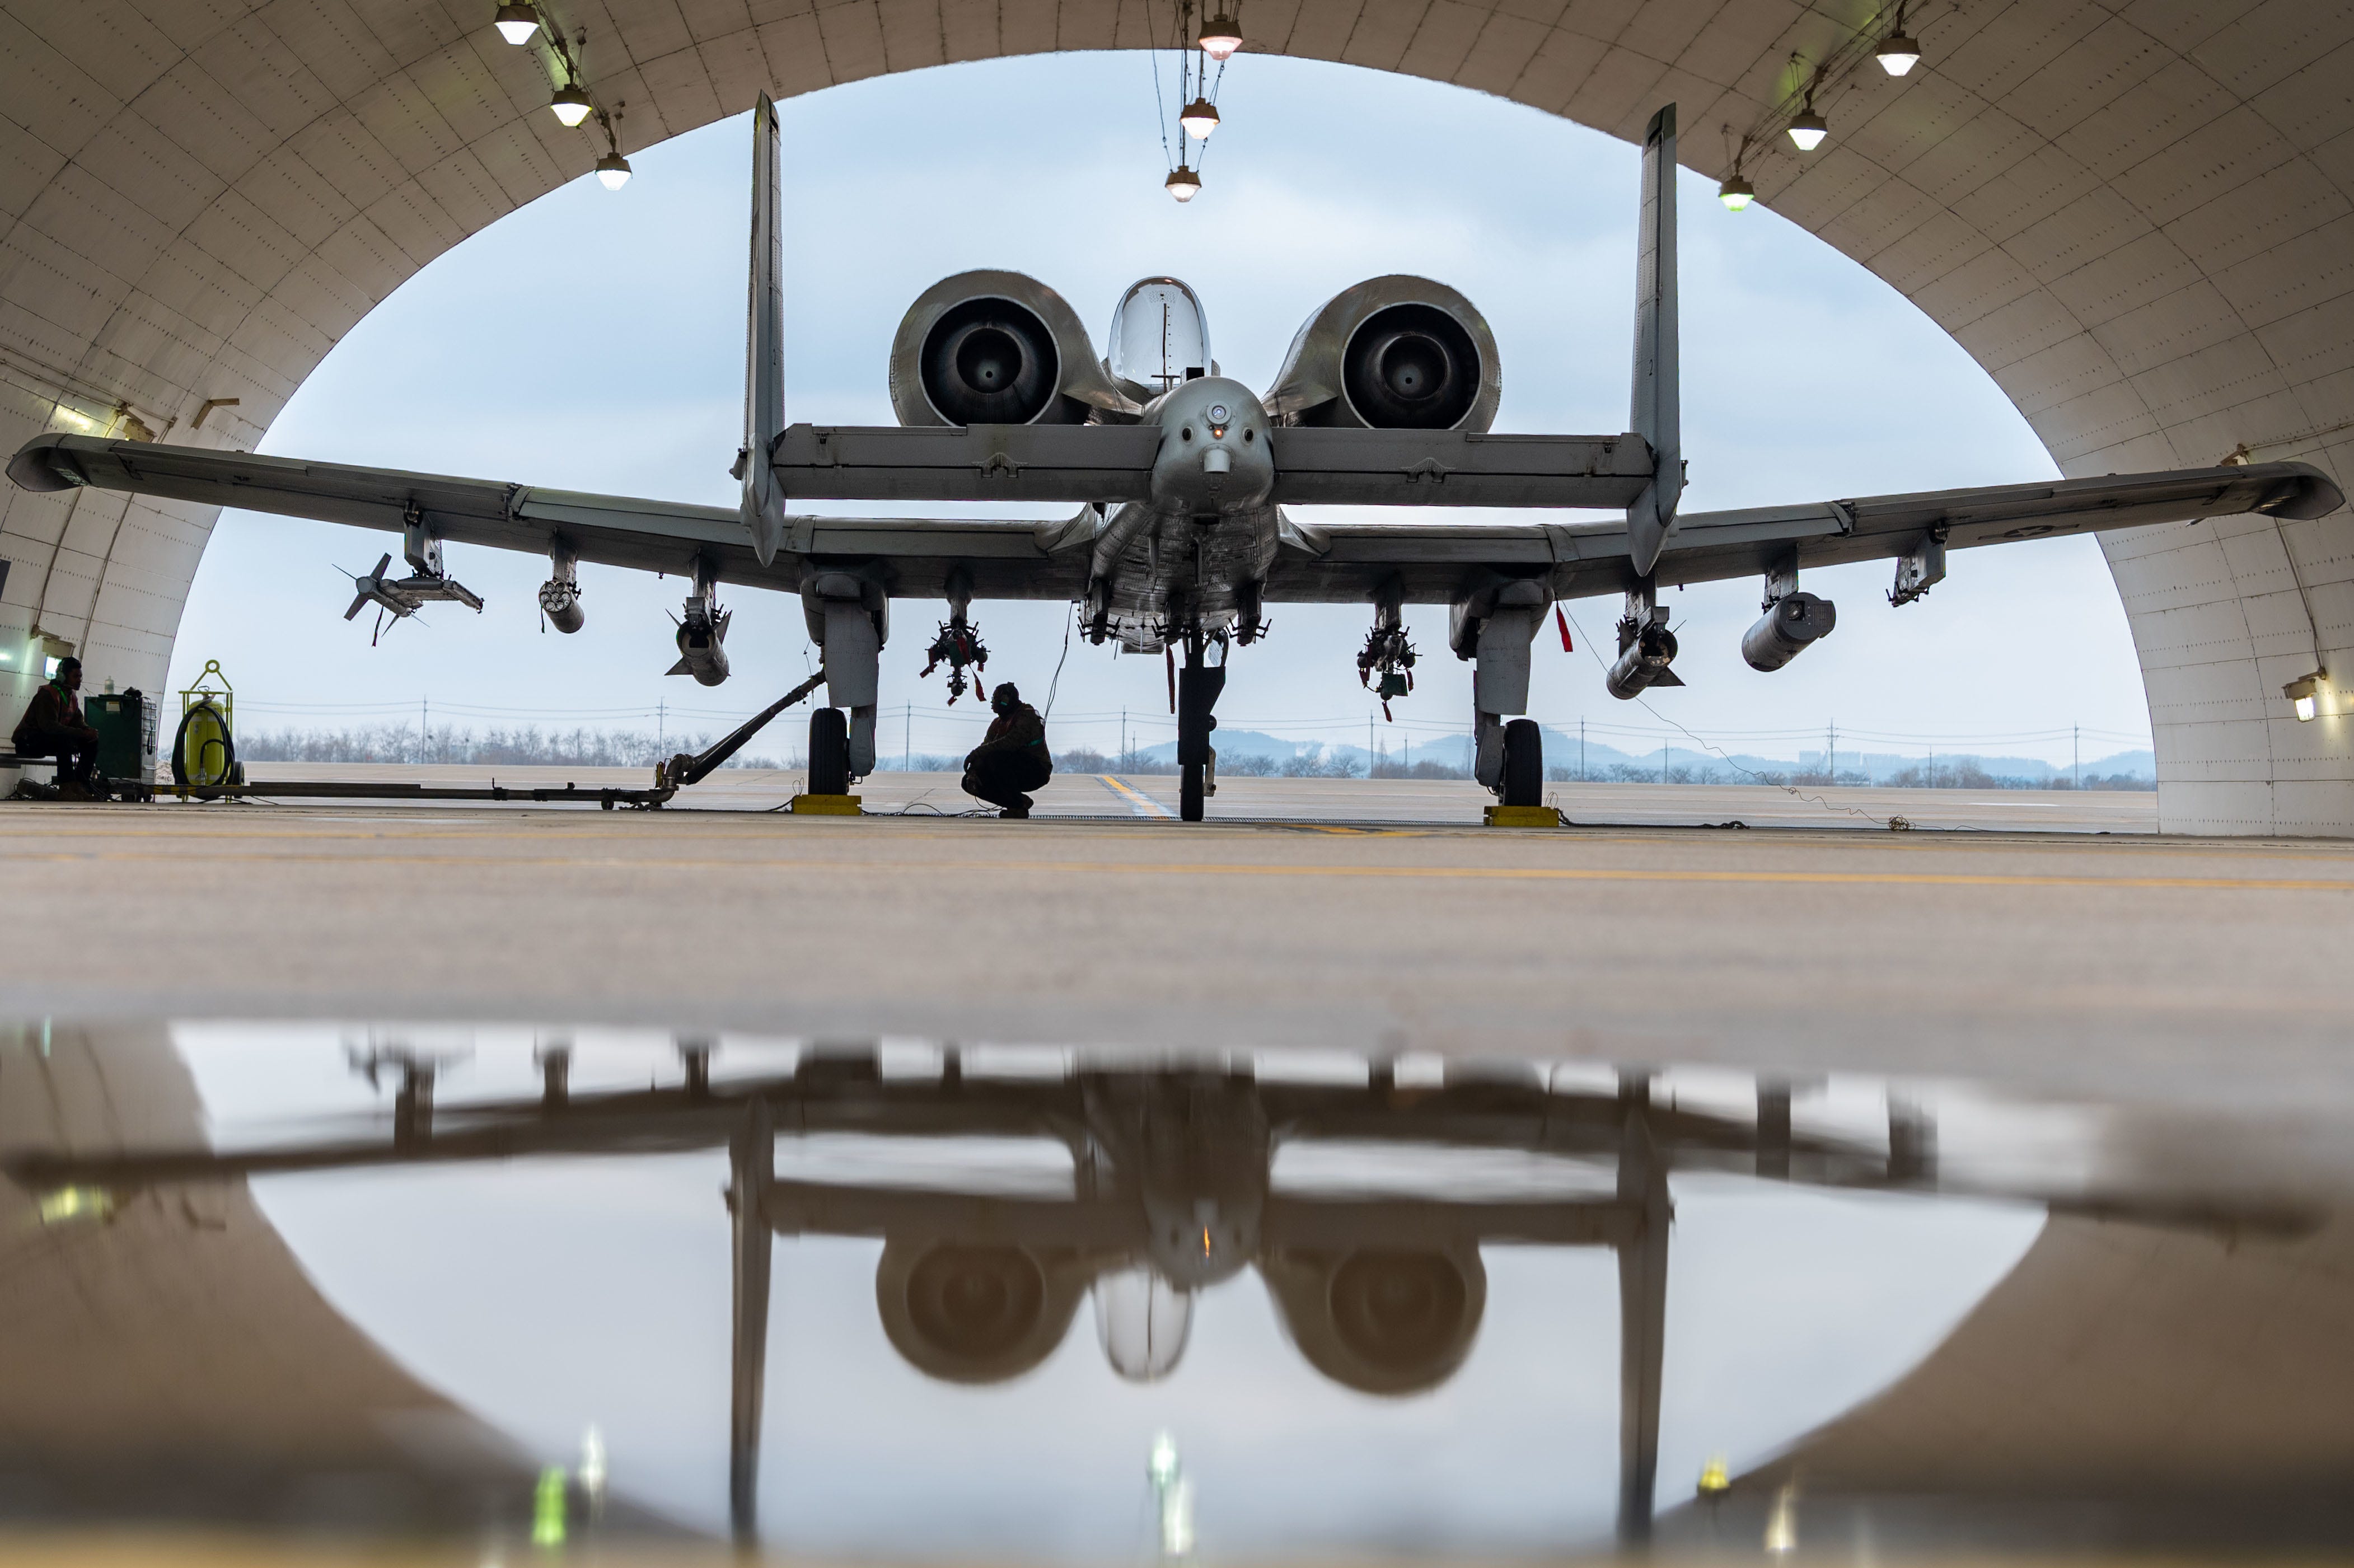 first us air force wing to get operational a-10 attack aircraft nearly 50 years ago starts sending its warthogs to the boneyard